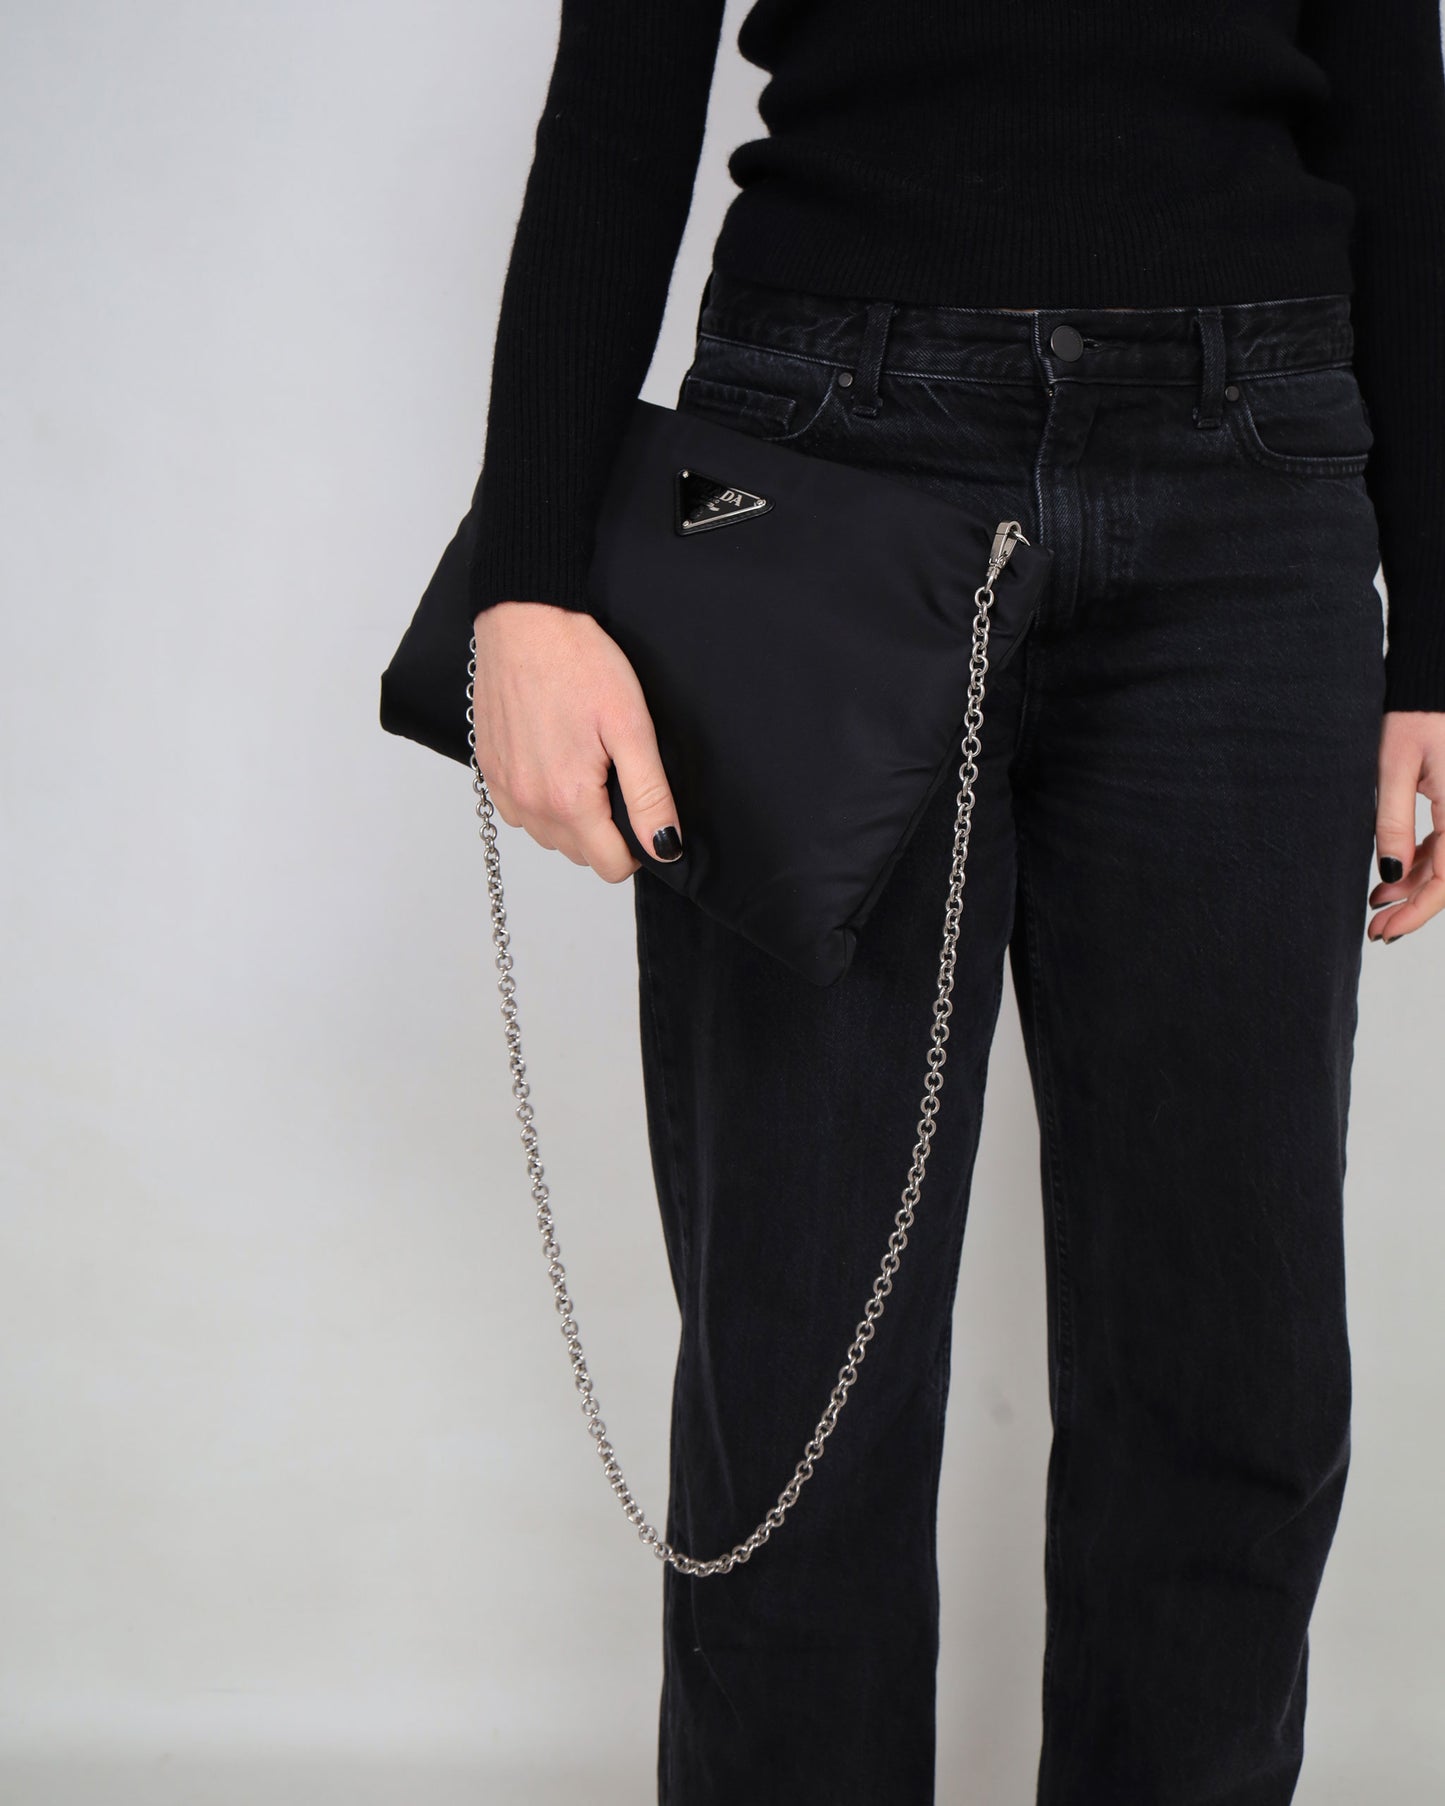 Prada Nylon Pouch with Long Chain Strap in Black